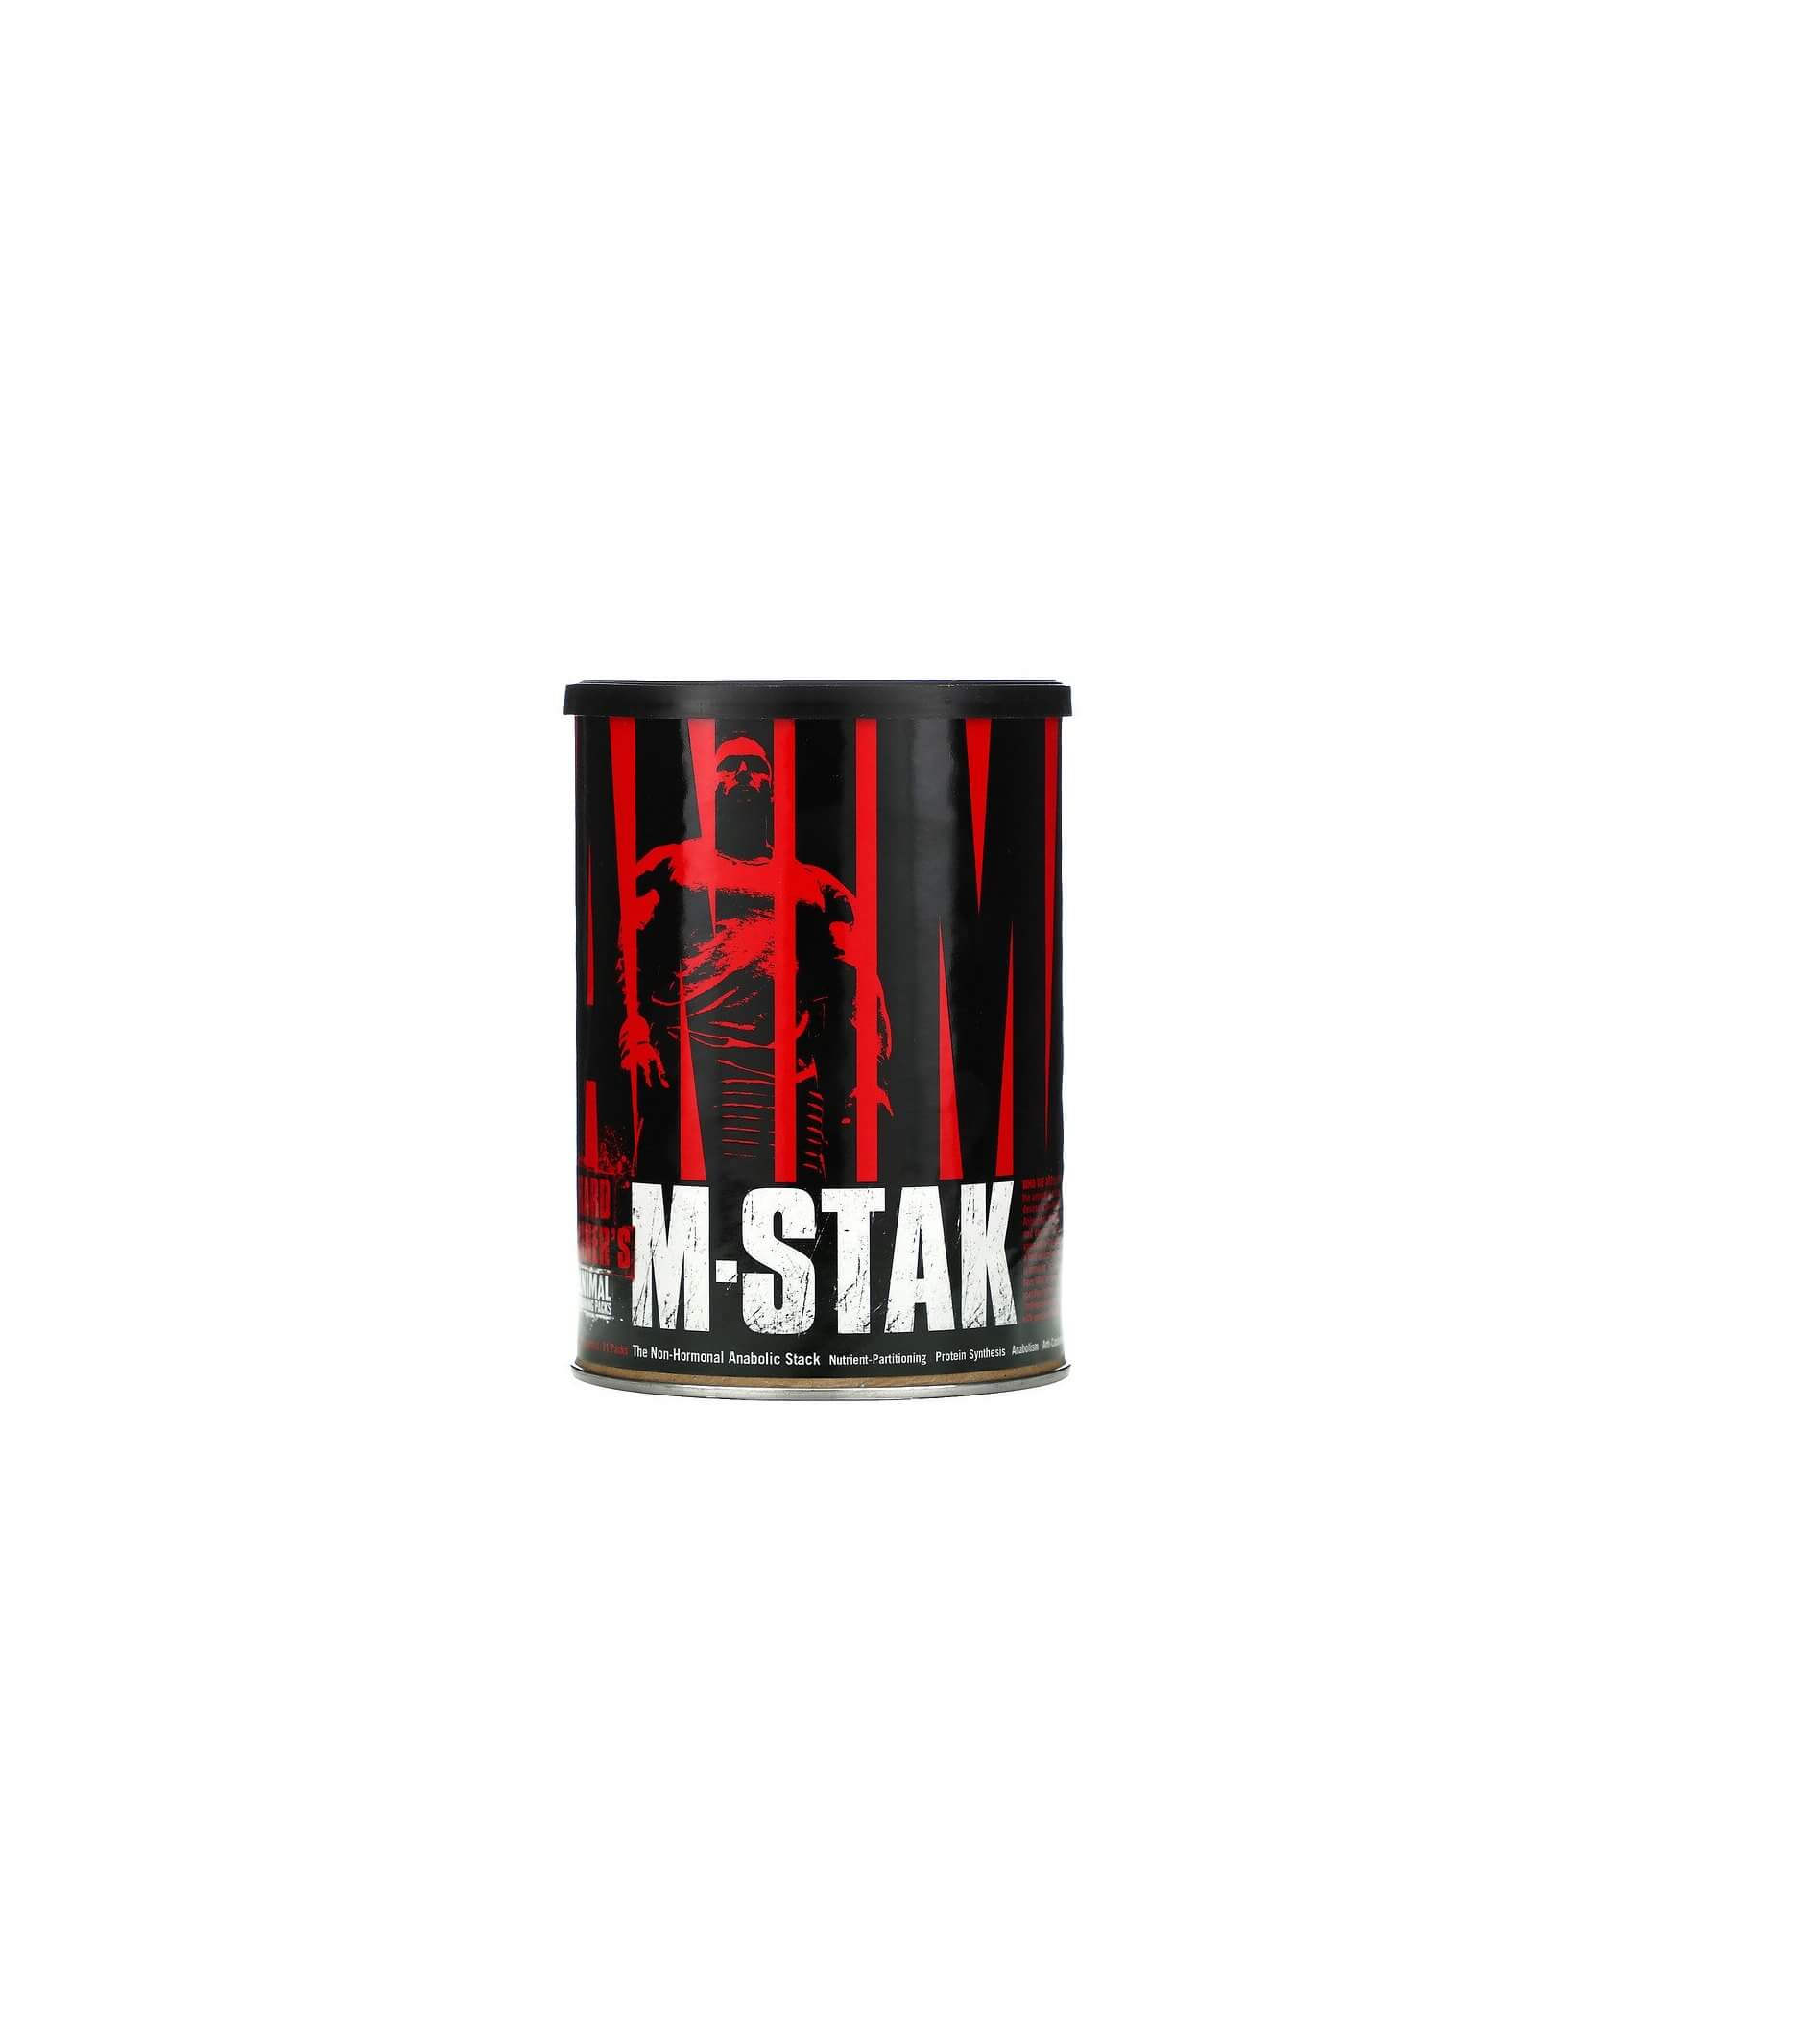 Universal Nutrition Animal M-Stak, 21 packs – 6 Pack Supplements